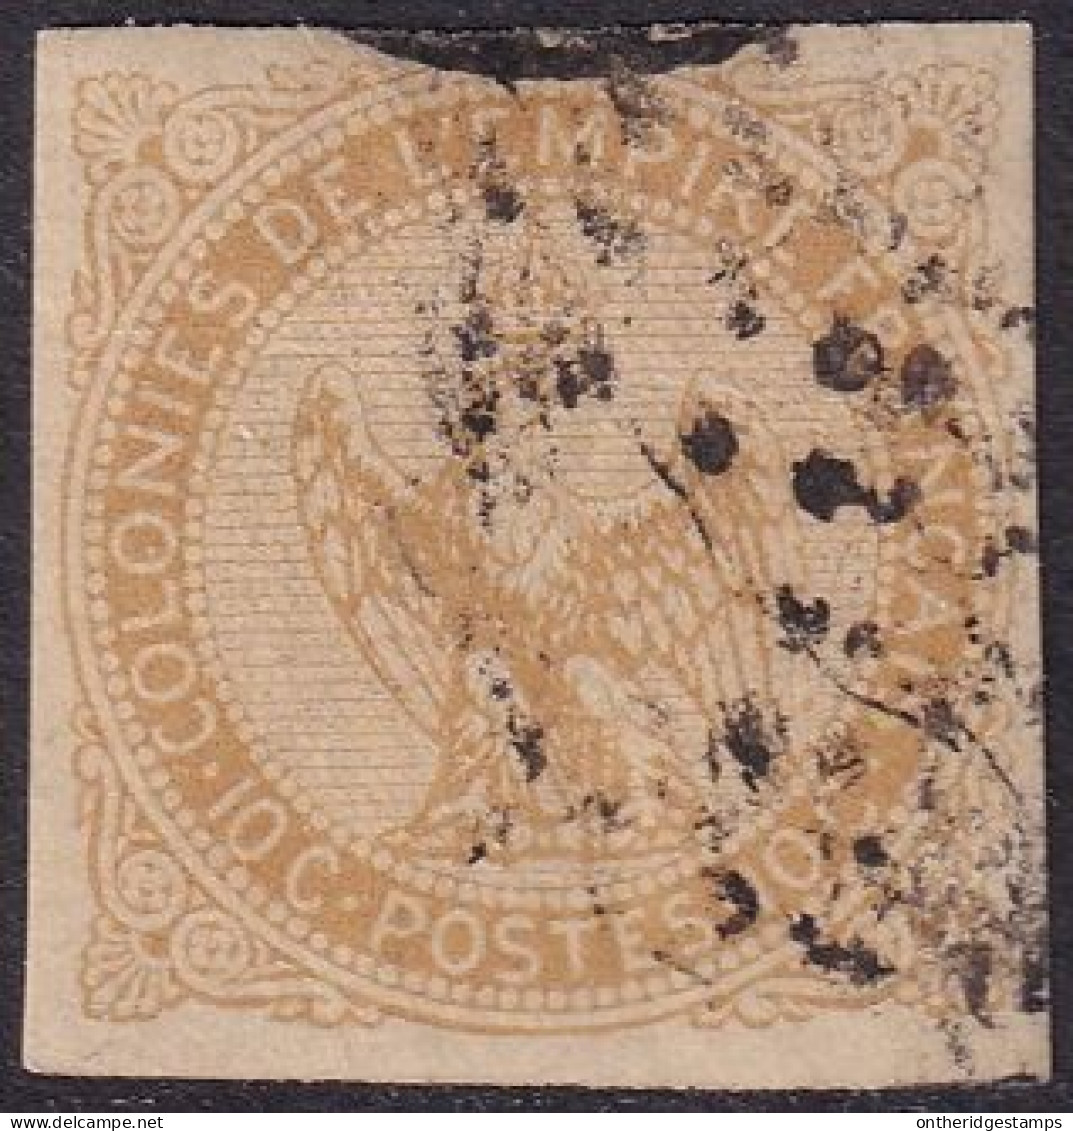 French Colonies 1859 Sc 3 Yt 3 Used Lozenge Cancel Paper Adhesion - Aigle Impérial